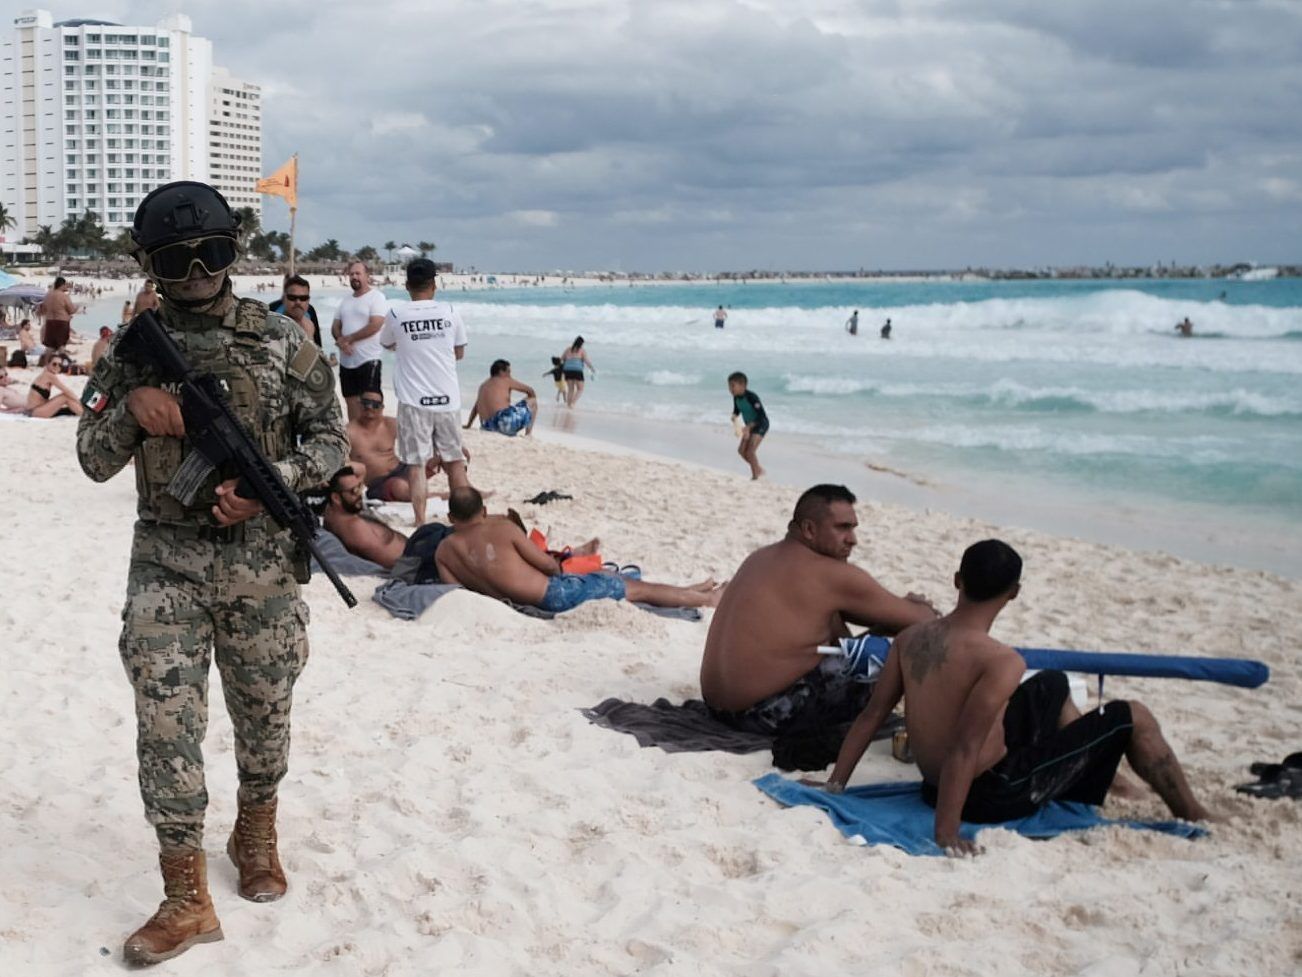 Cancun beaches get 1,500strong military guard to protect tourists from